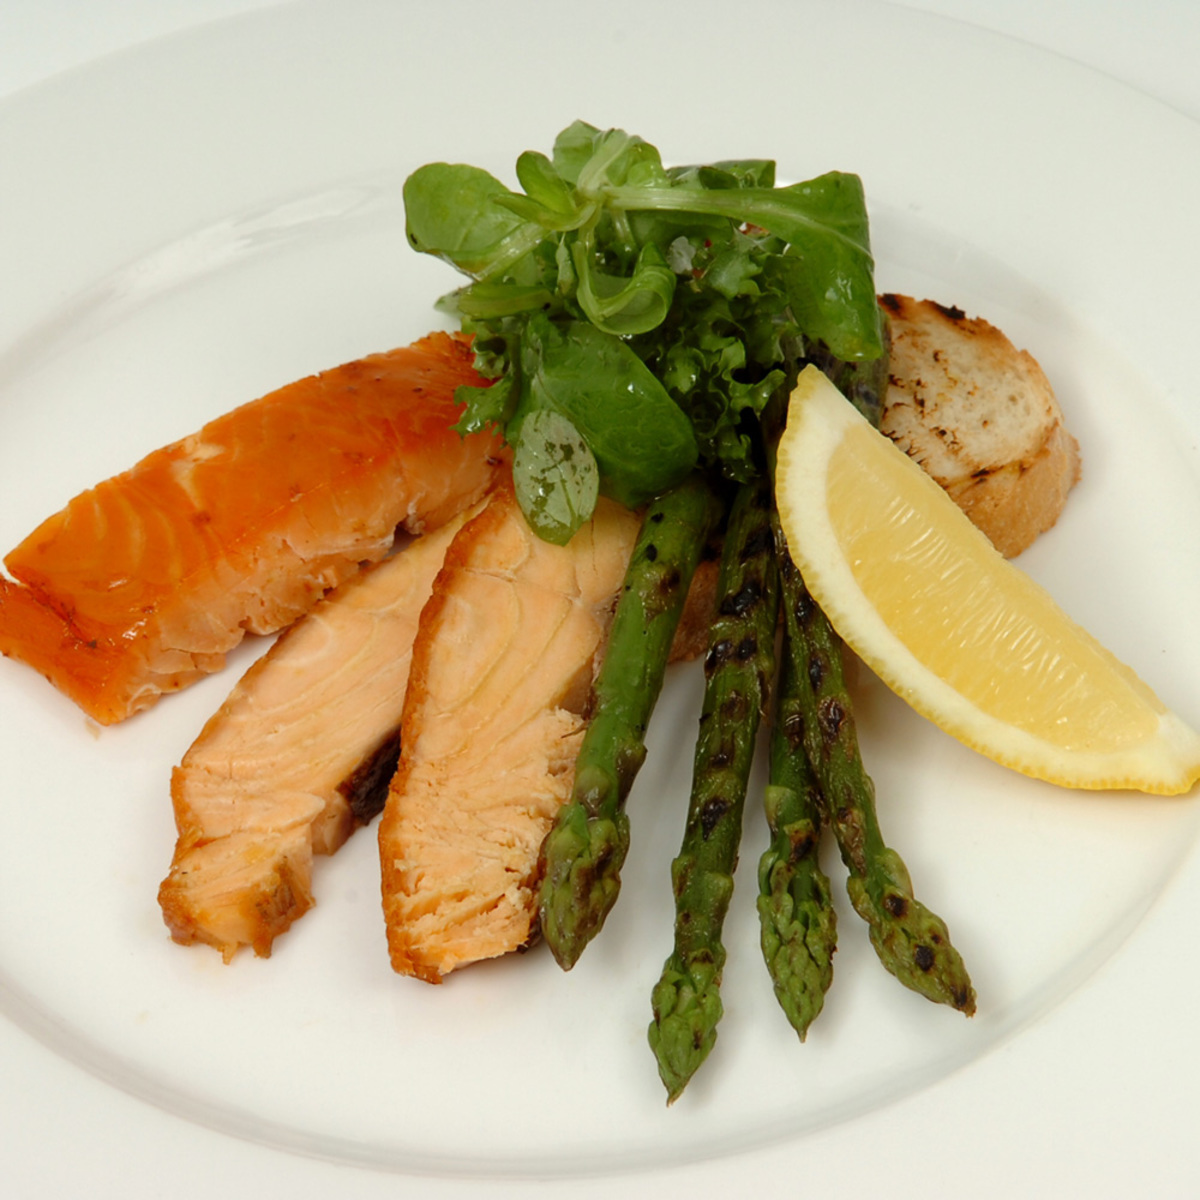 Coln Valley Kiln Roasted Salmon, 800g (Serves 6-8 people)